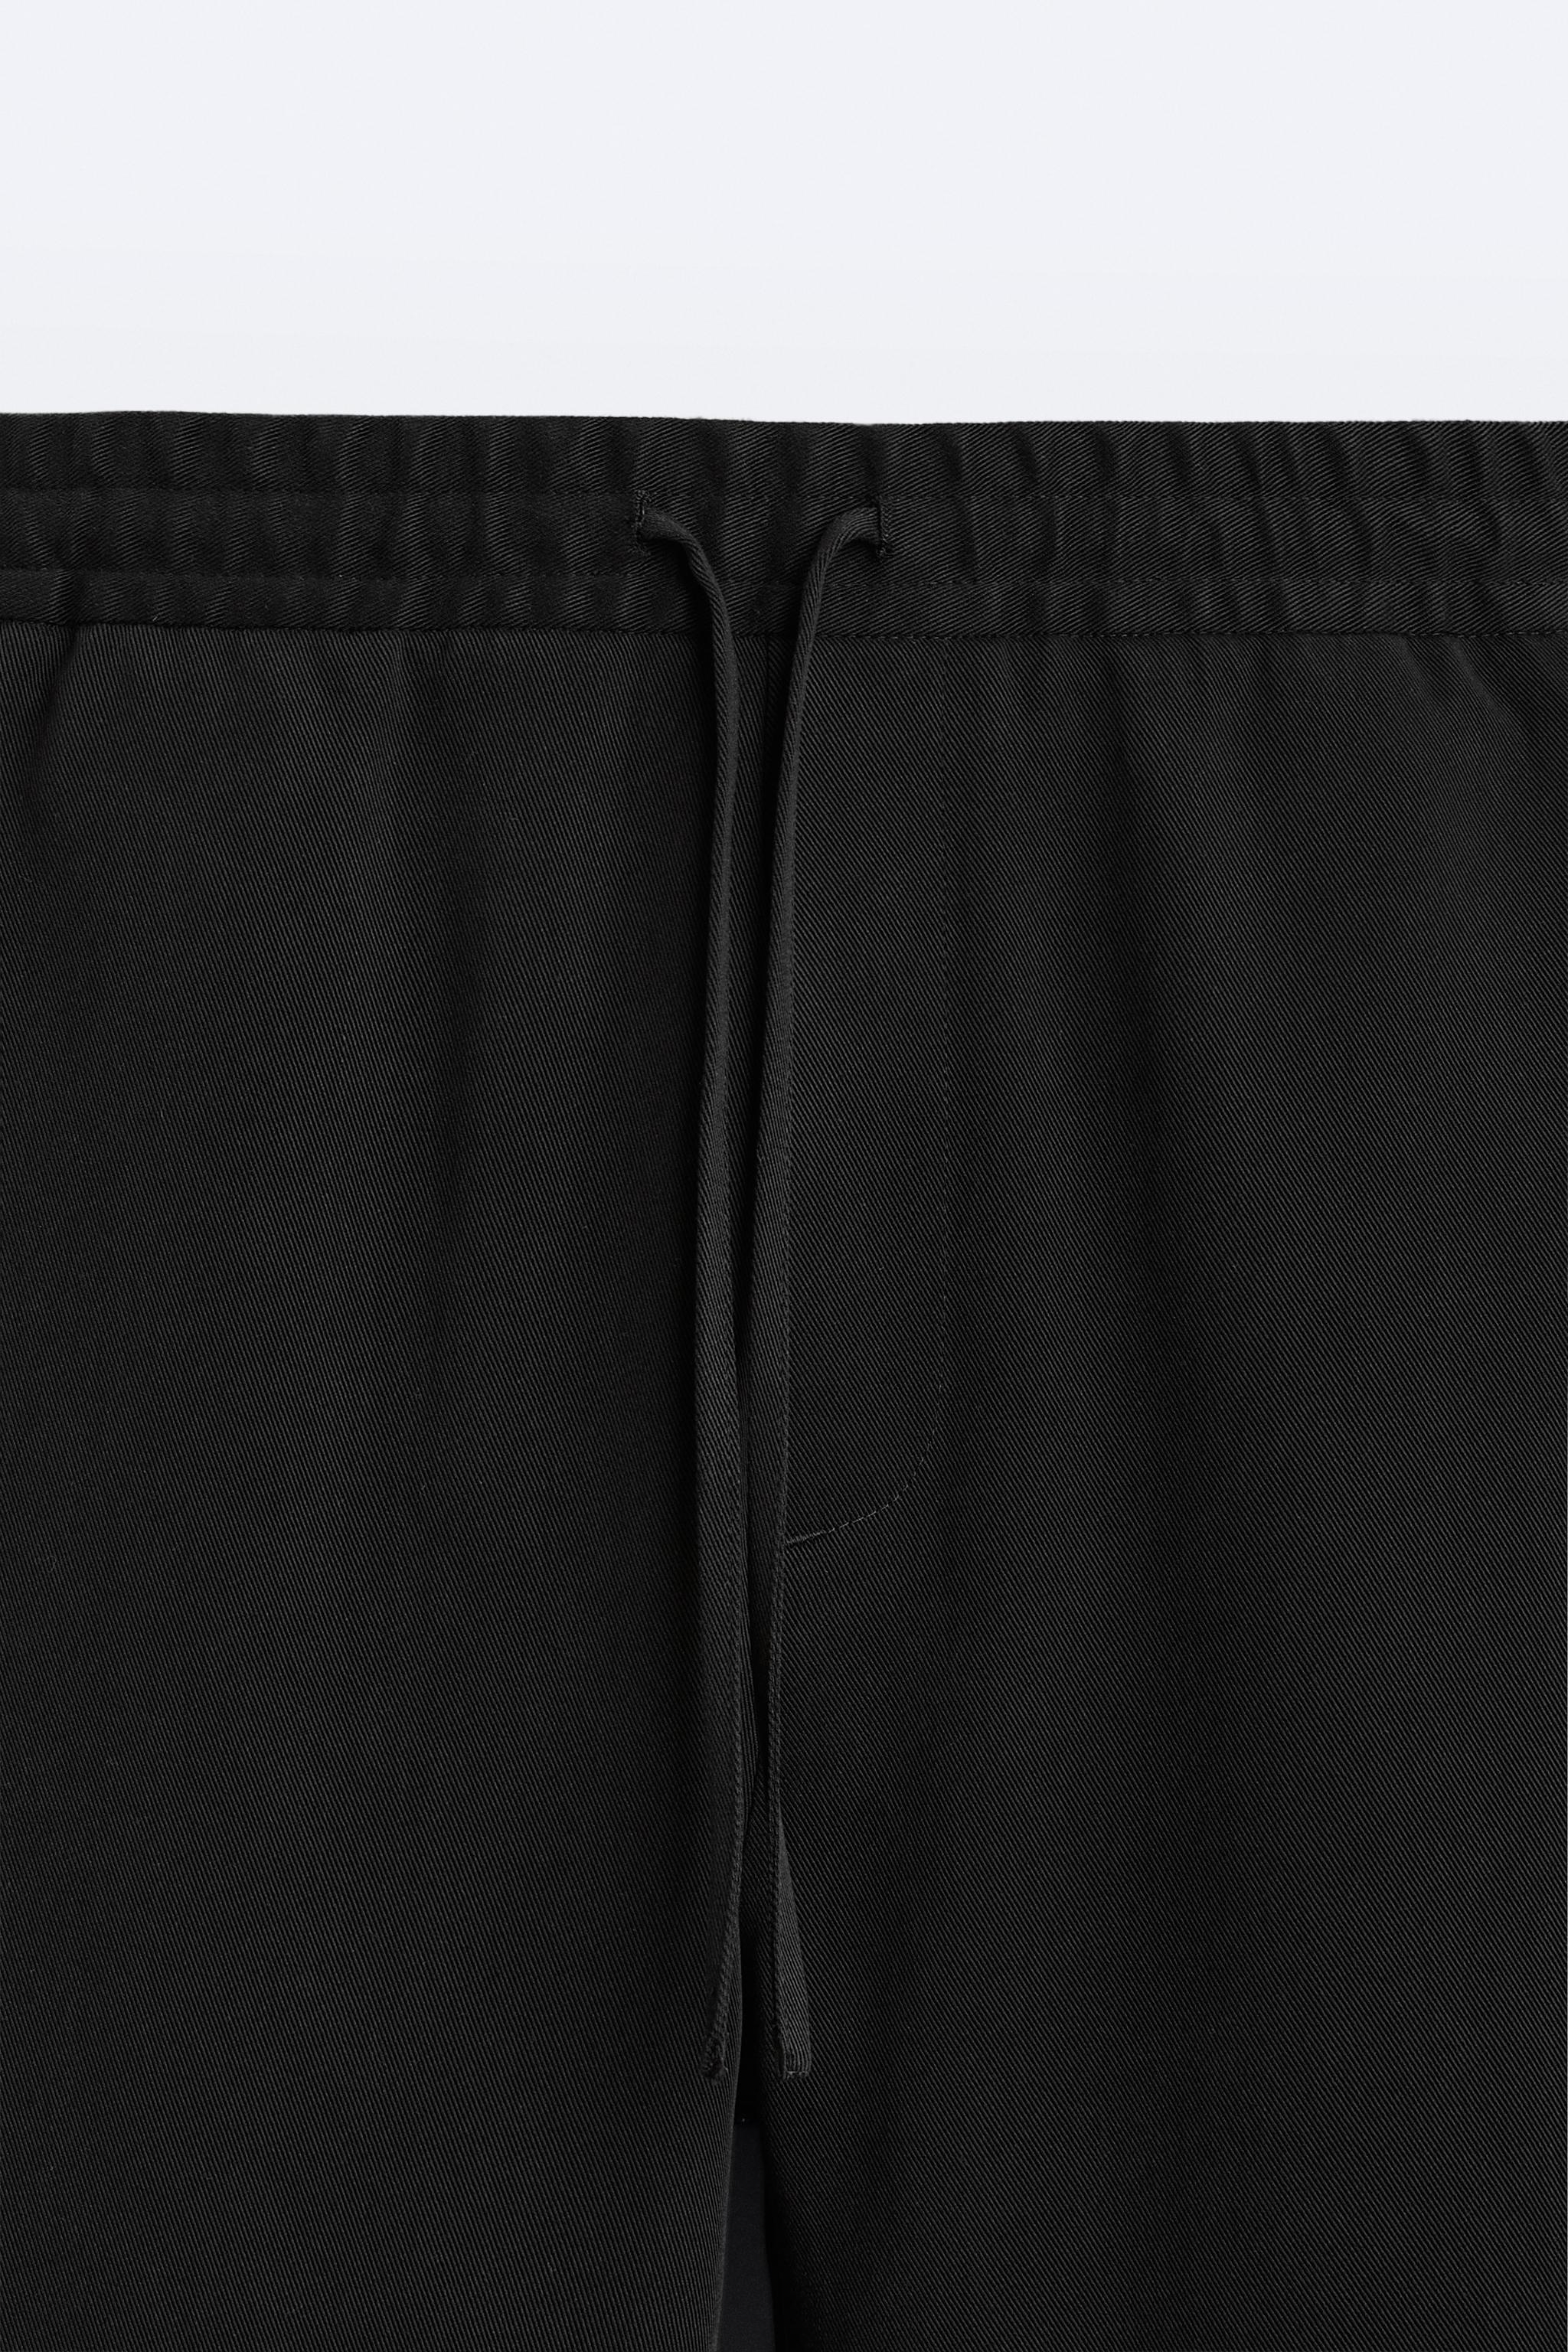 Zara 100% Lyocell Solid Black Casual Pants Size XS - 53% off